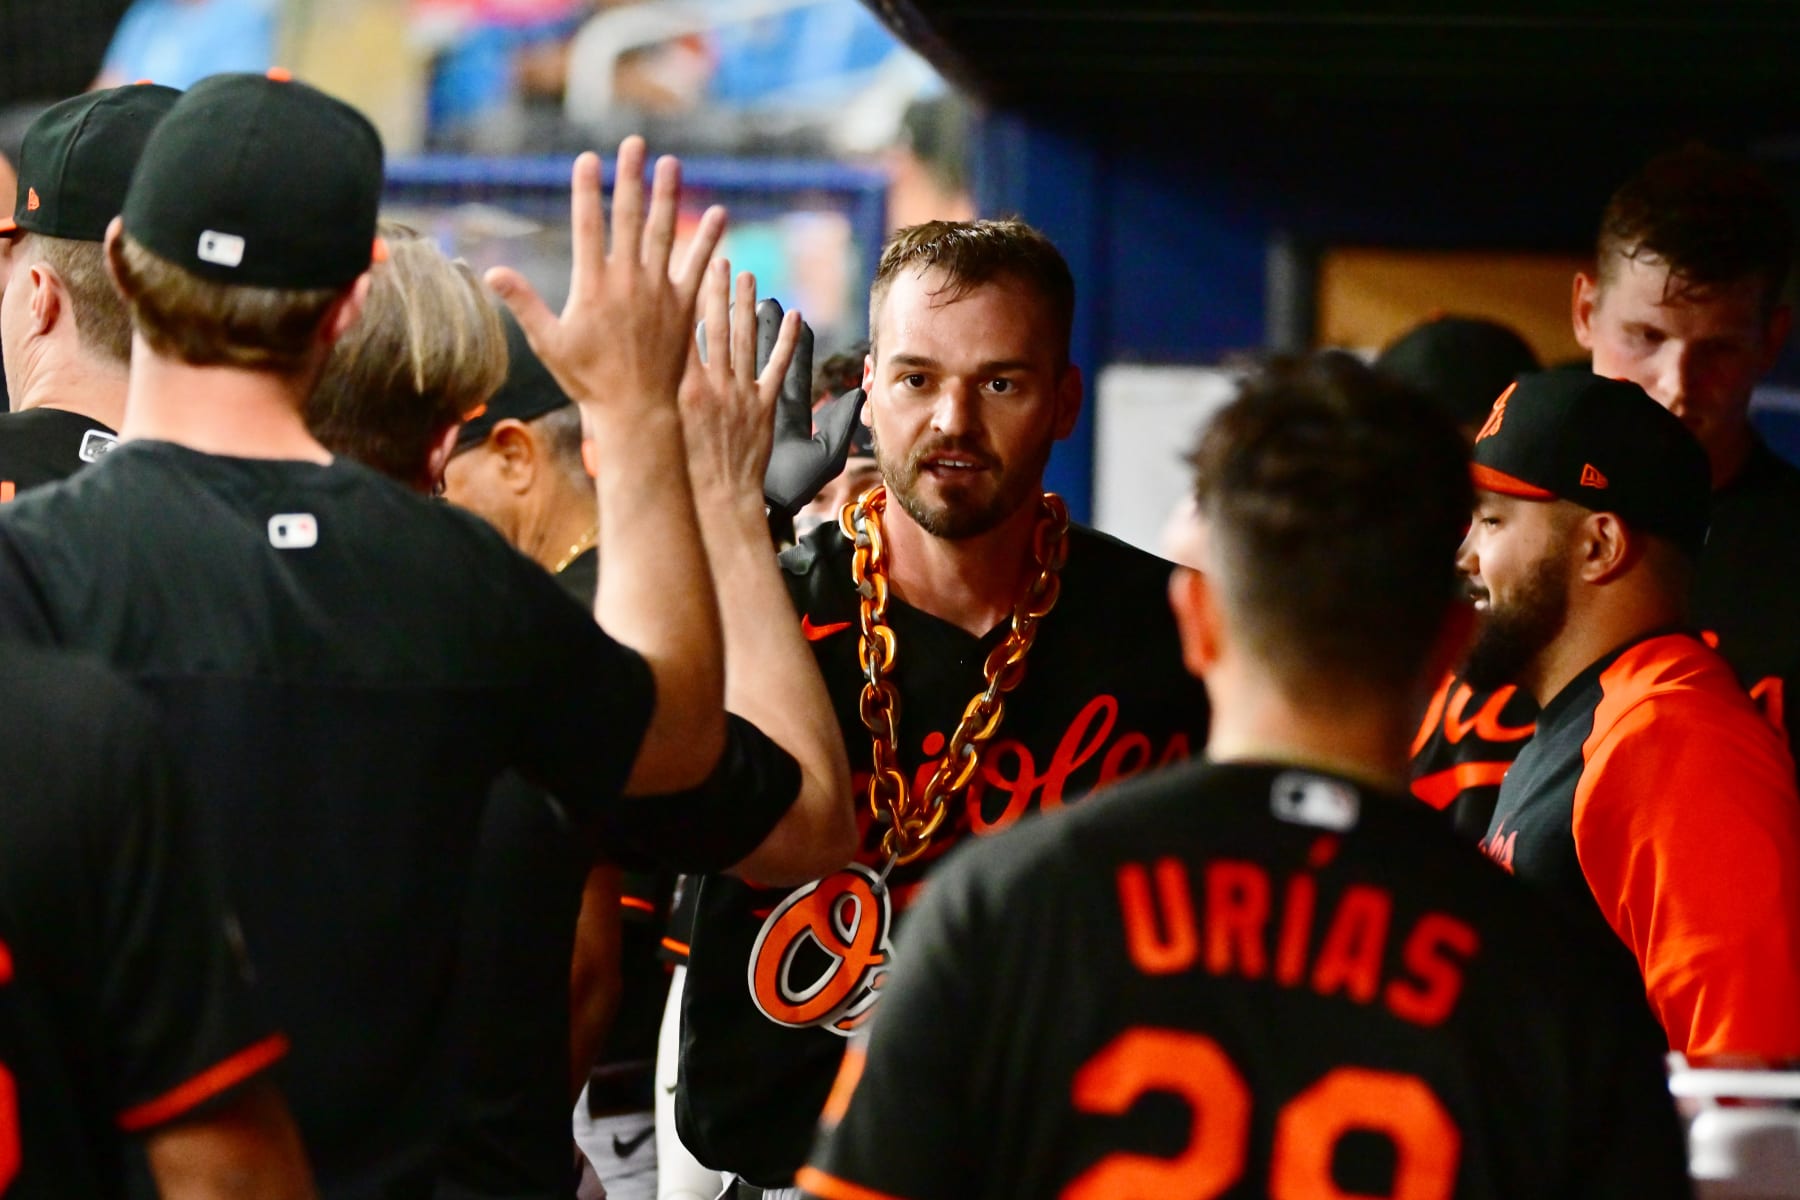 Orioles Fans Are Focused On A Drastic Turnaround Continuing